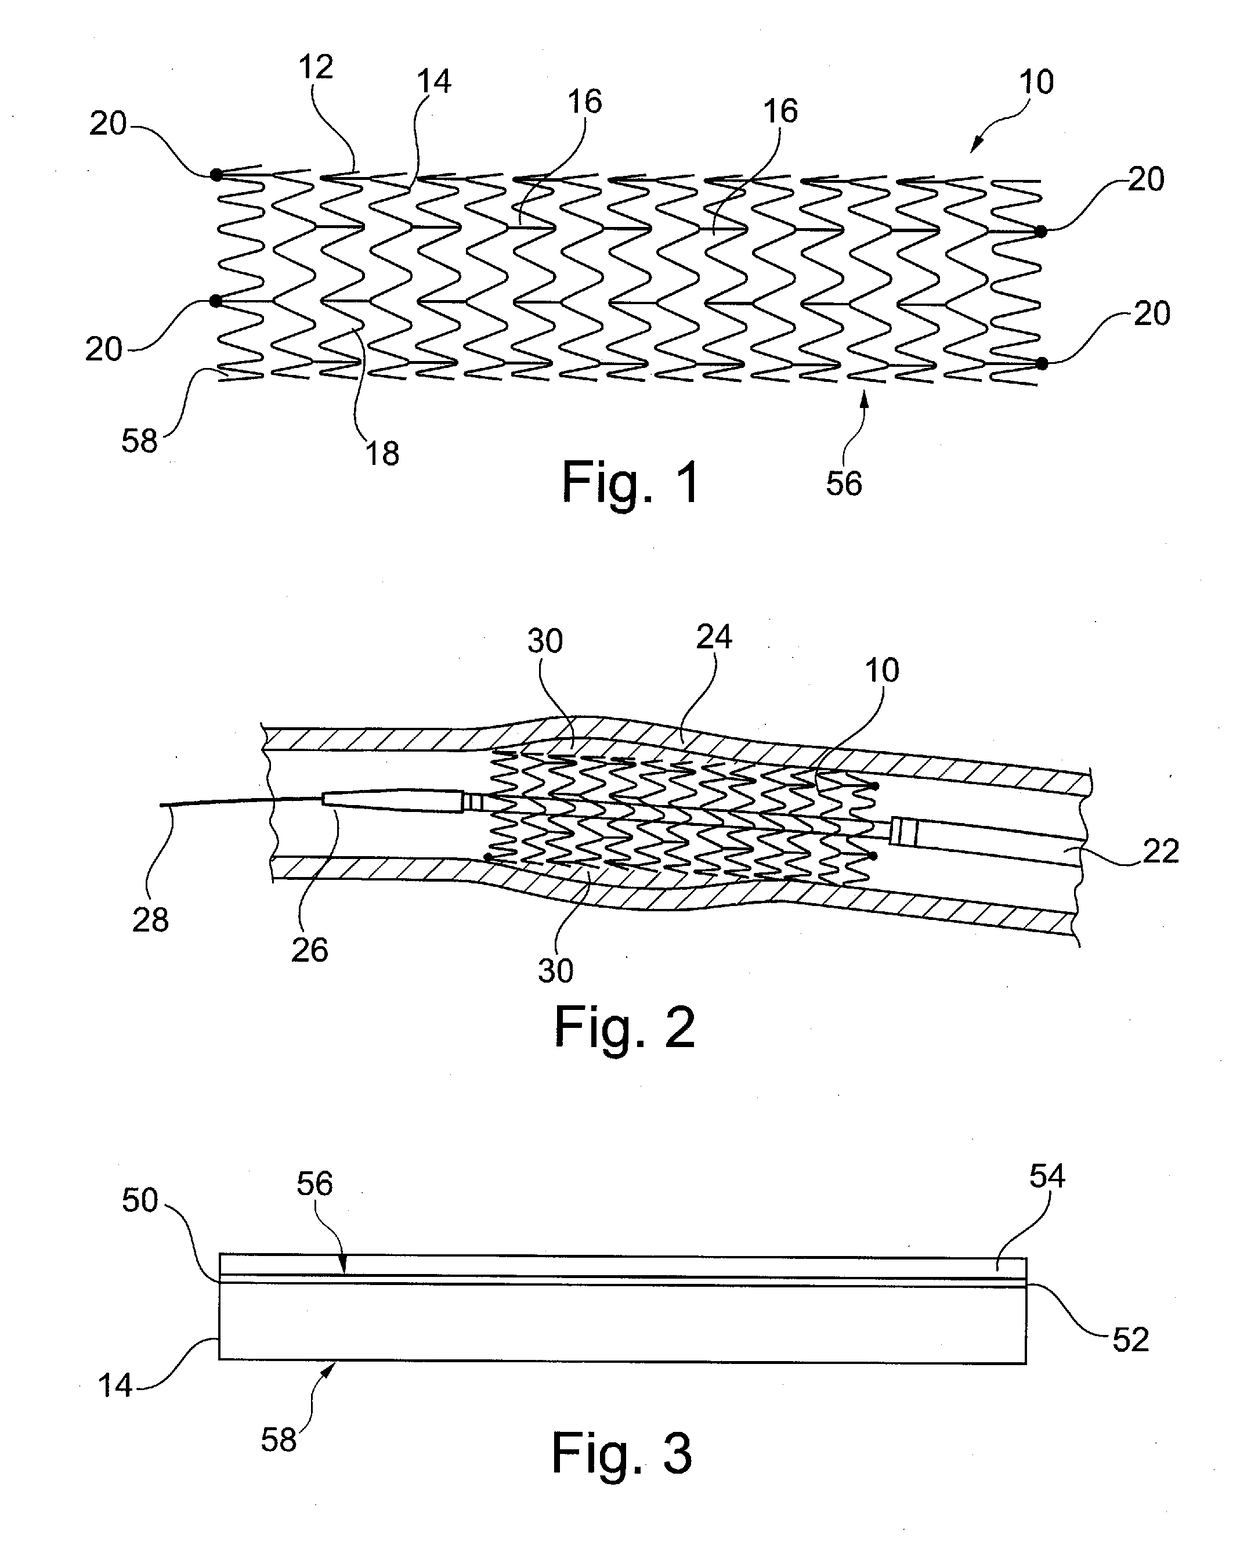 Implantable medical device with differentiated luminal and abluminal characteristics